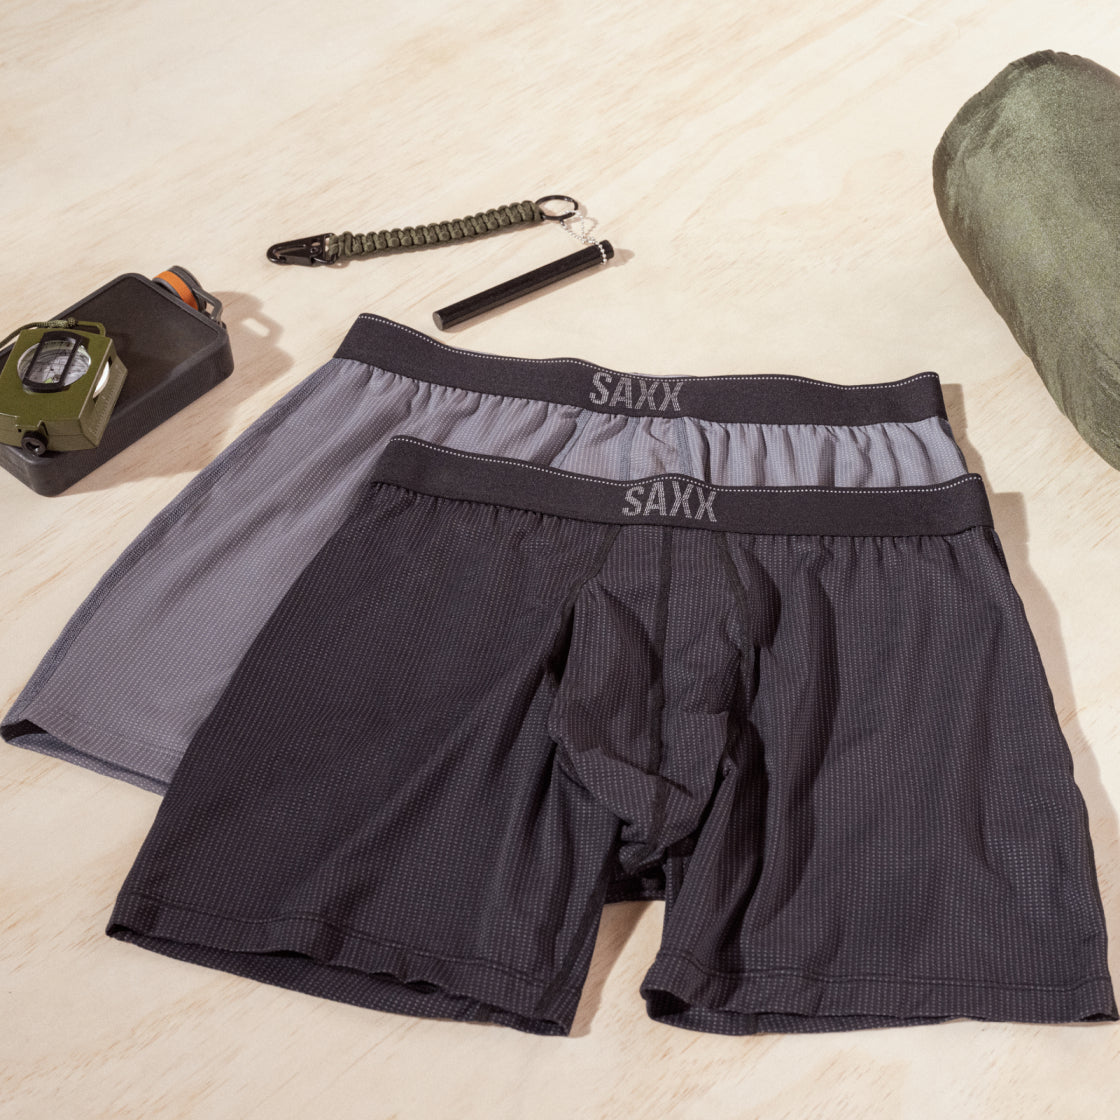 Two pairs of boxer briefs laid on a flat surface. To one side there is a compass on a water cannister and a pen light above. 